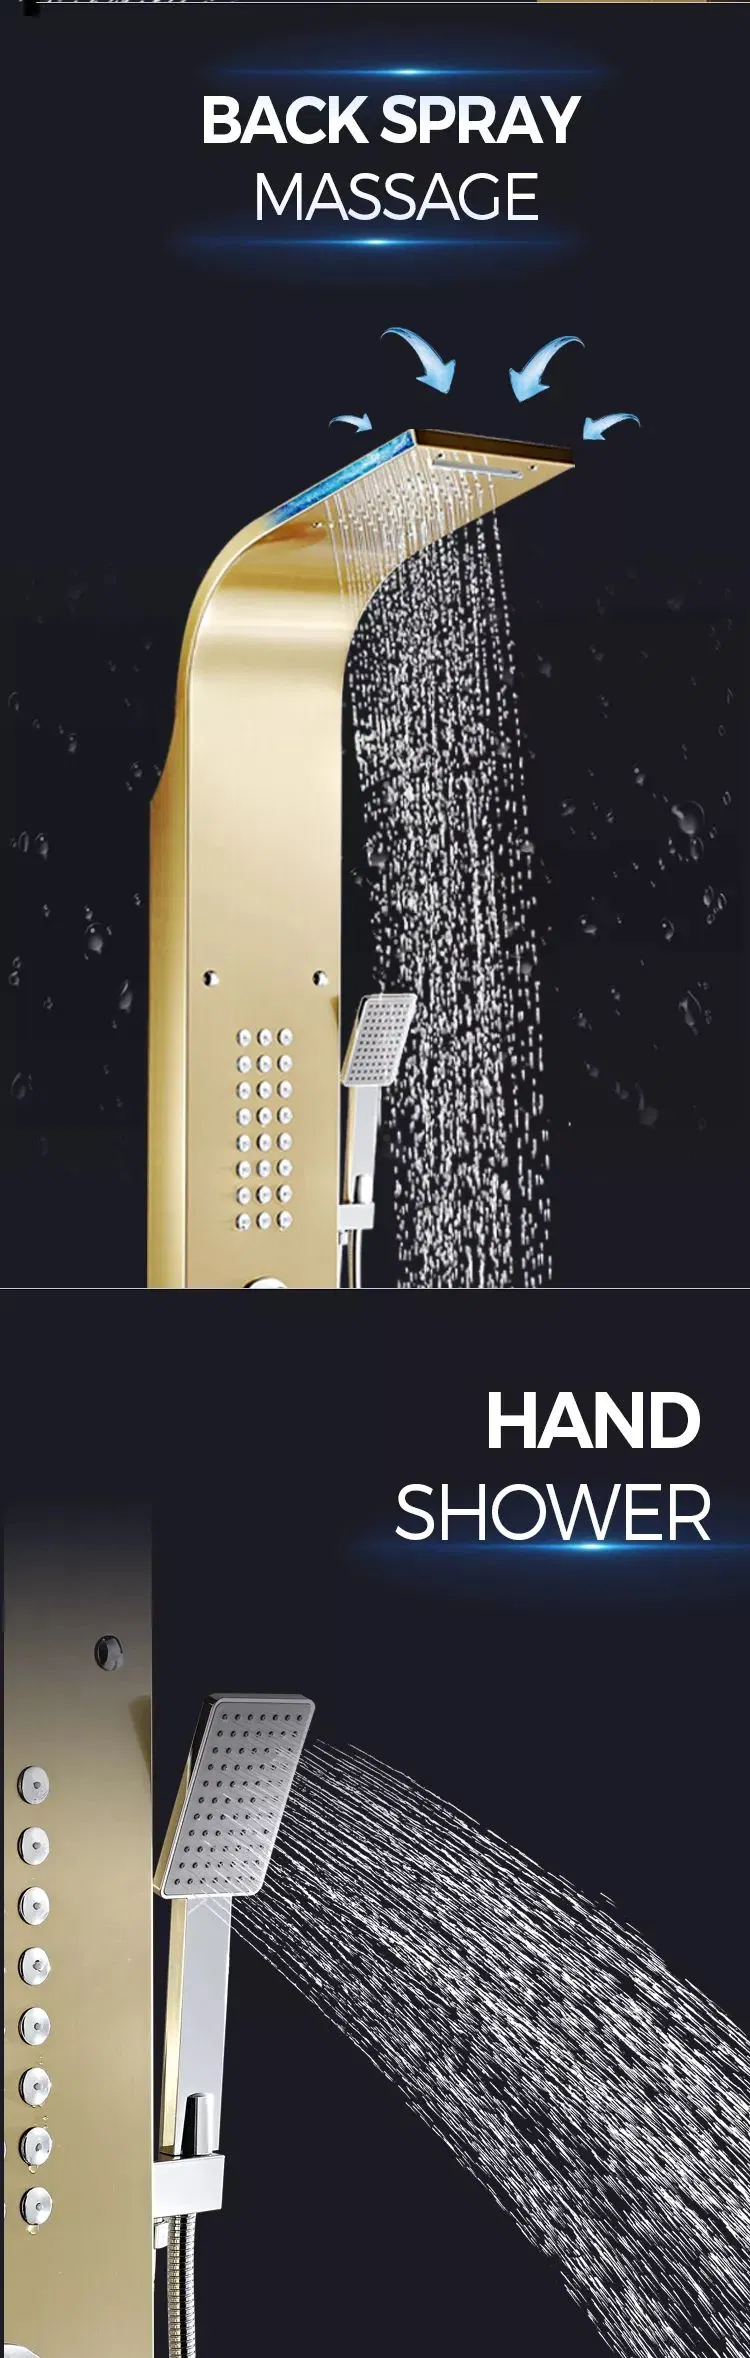 Golden Nickel Brushed Shower Panel Column Towers 304stainless Steel Waterfall SPA Jets Smart Shower Wall Panel Shower Panel